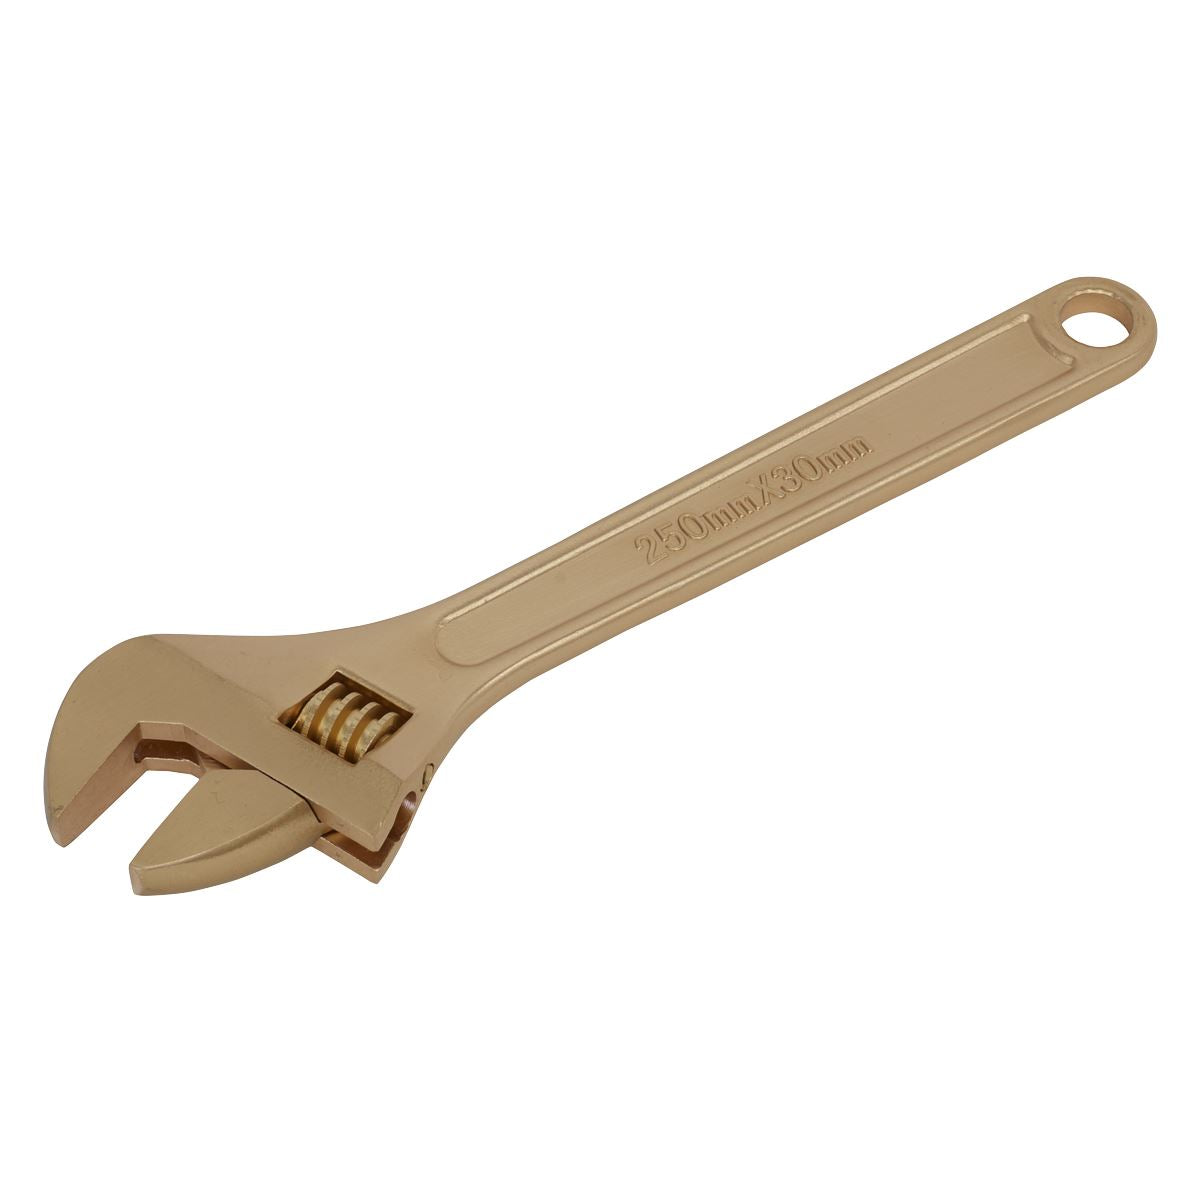 Sealey Adjustable Wrench 250mm - Non-Sparking NS067